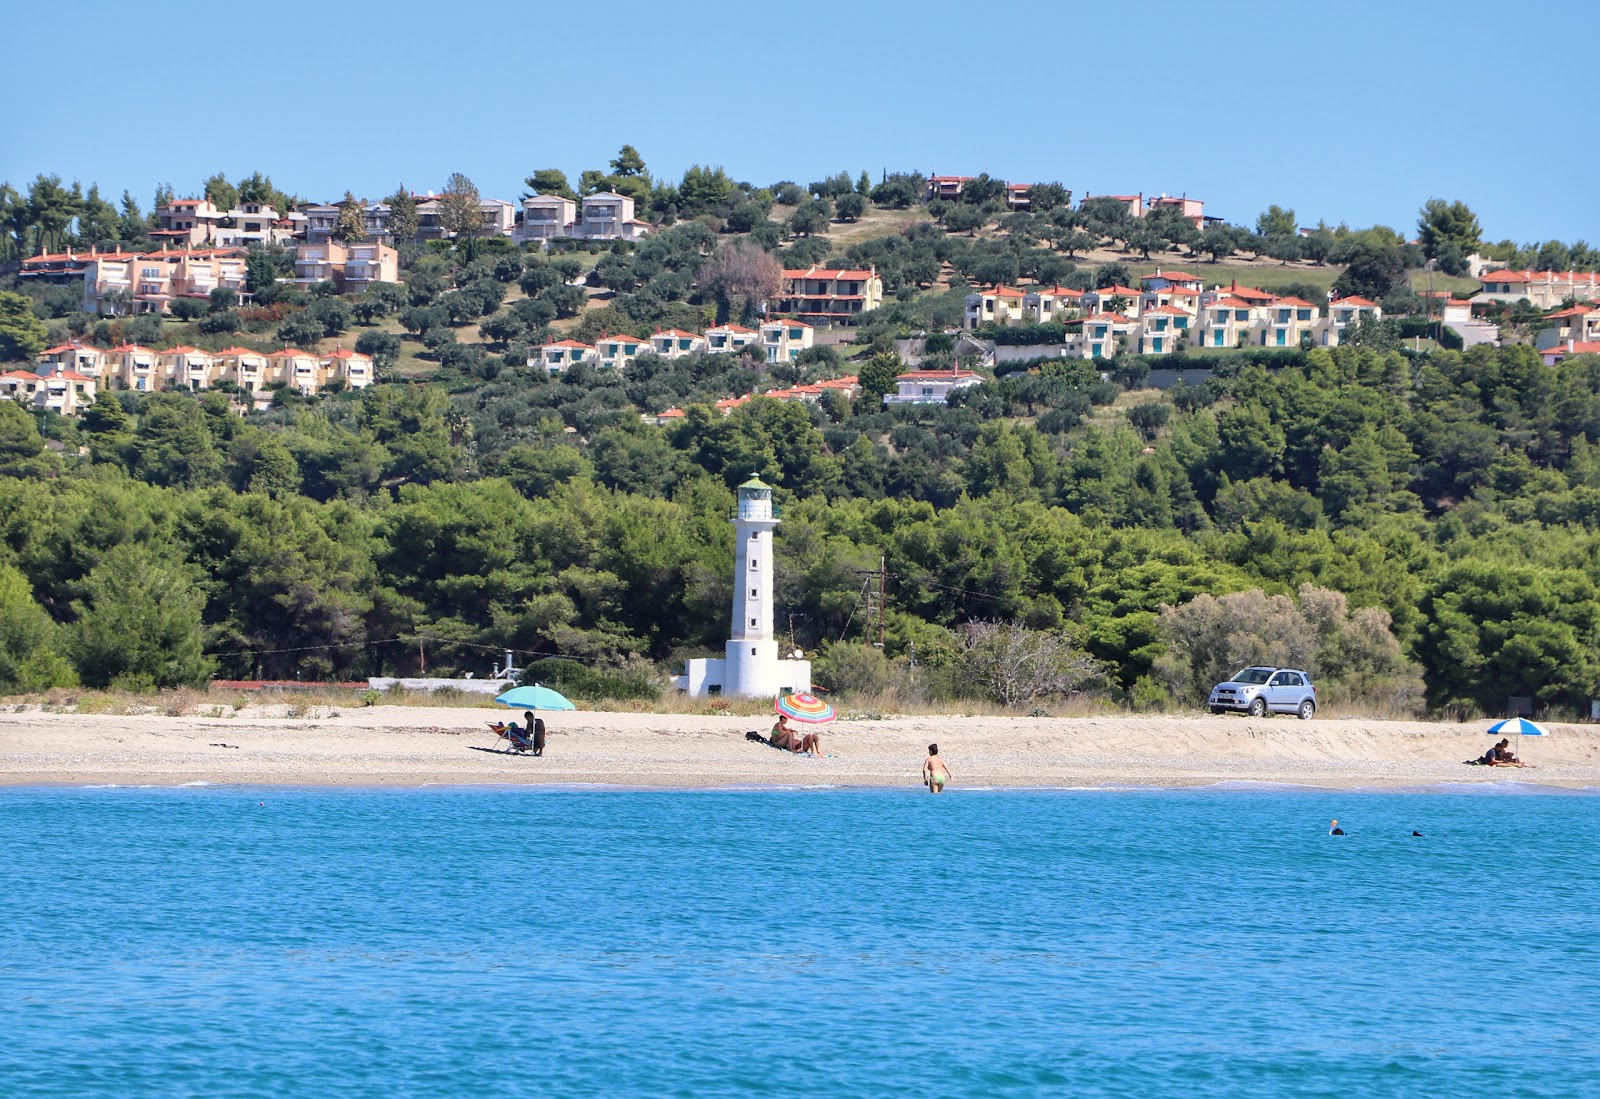 Photo of Possidi beach - popular place among relax connoisseurs